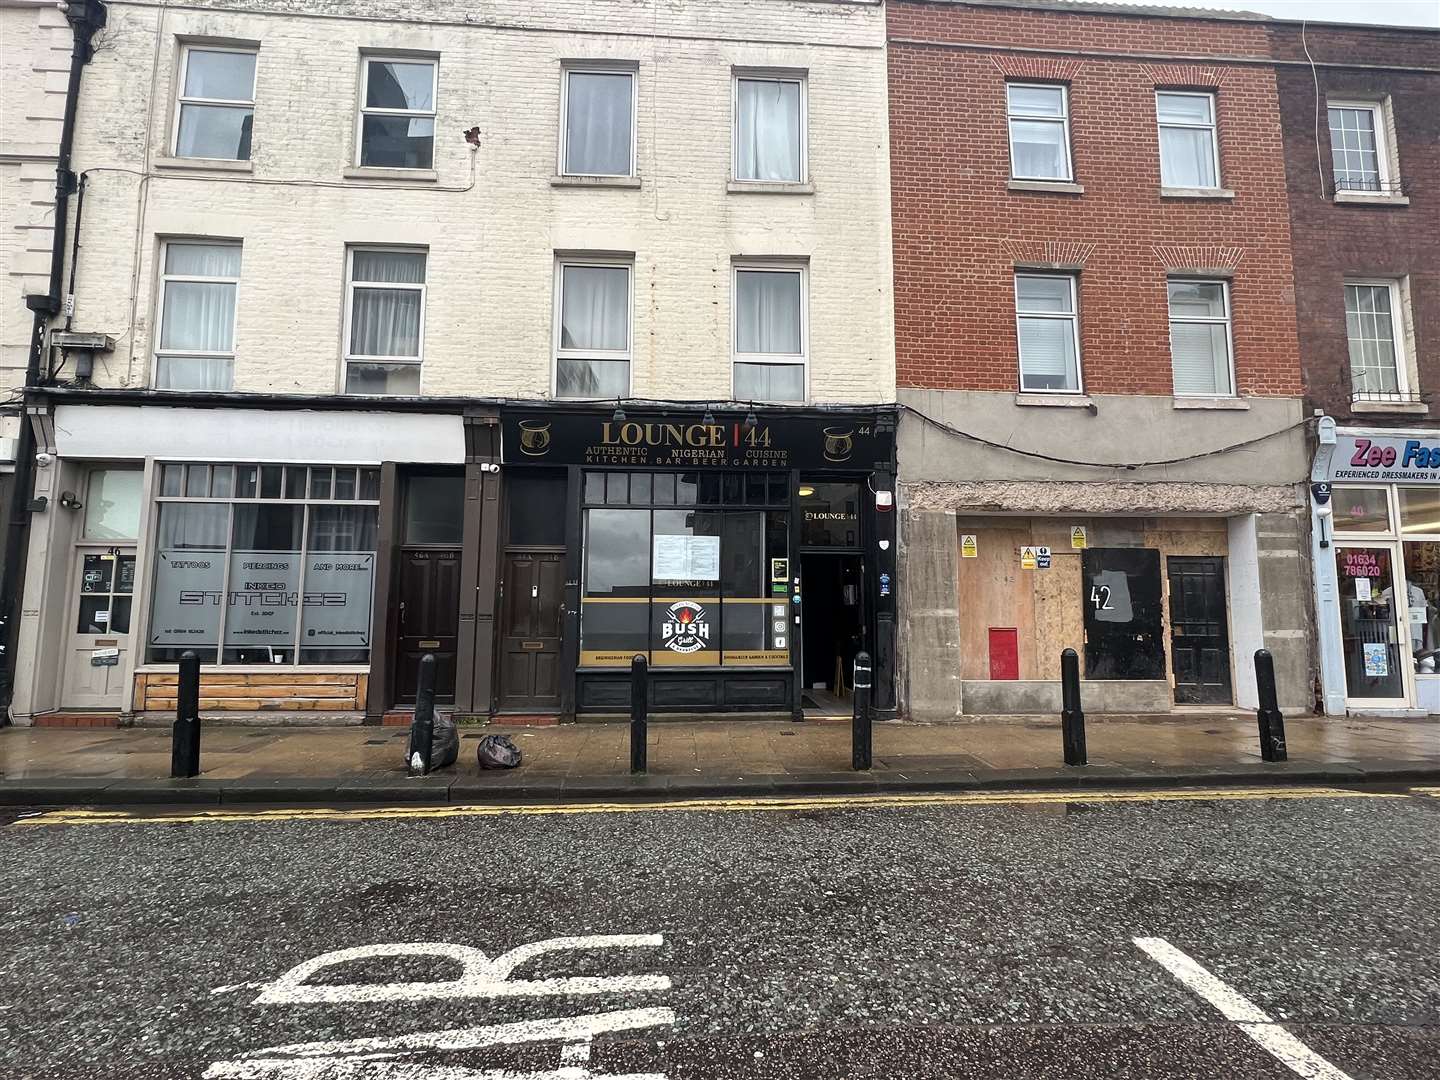 Lounge 44 restaurant and bar in Chatham High Street (63006079)